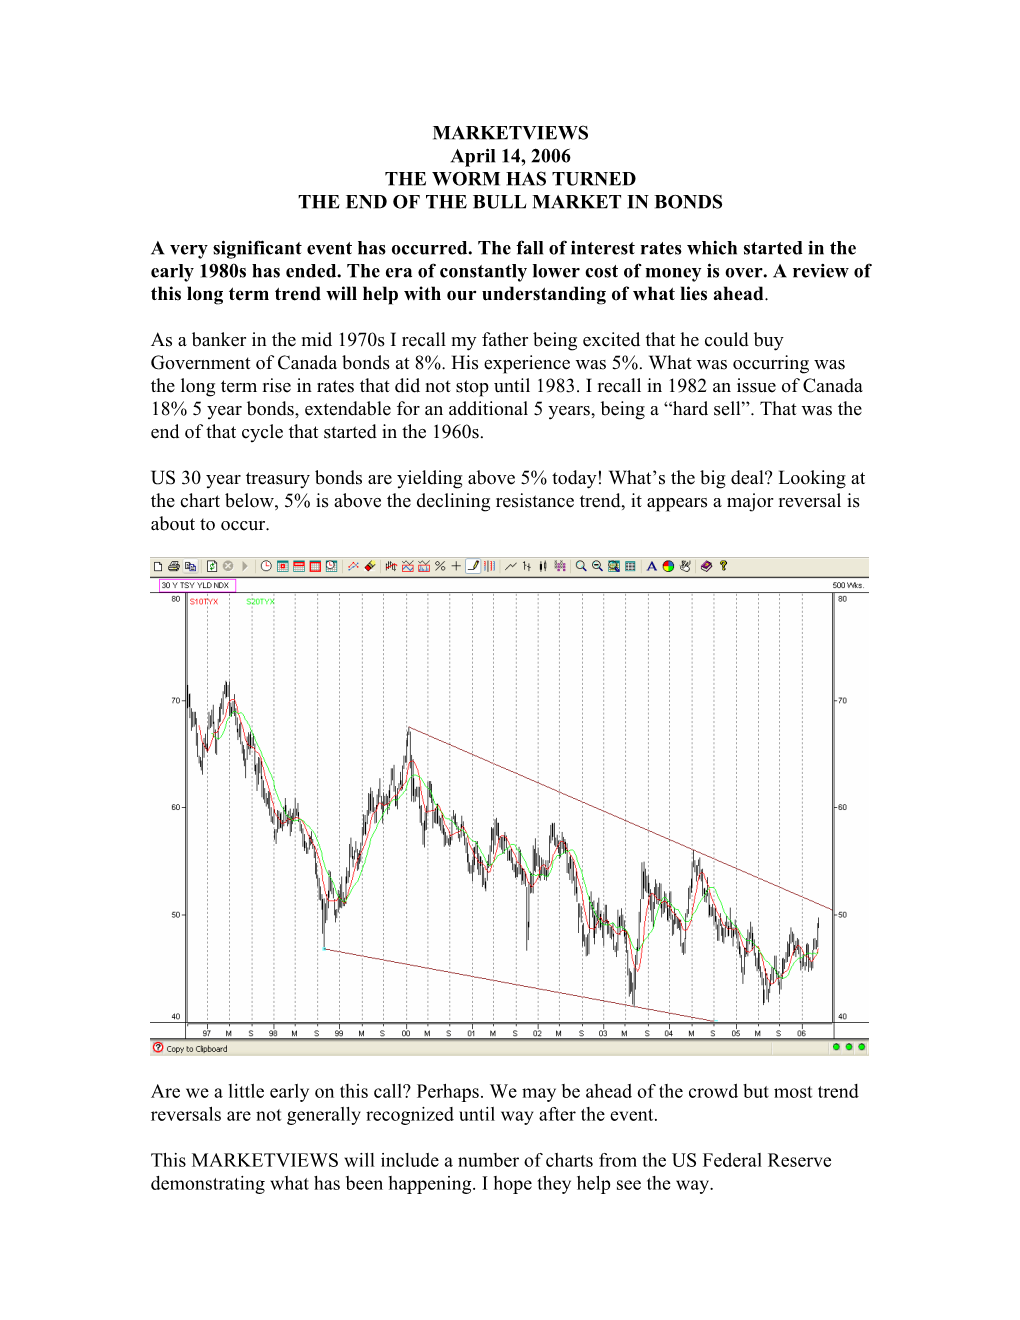 MARKETVIEWS April 14, 2006 the WORM HAS TURNED the END of the BULL MARKET in BONDS